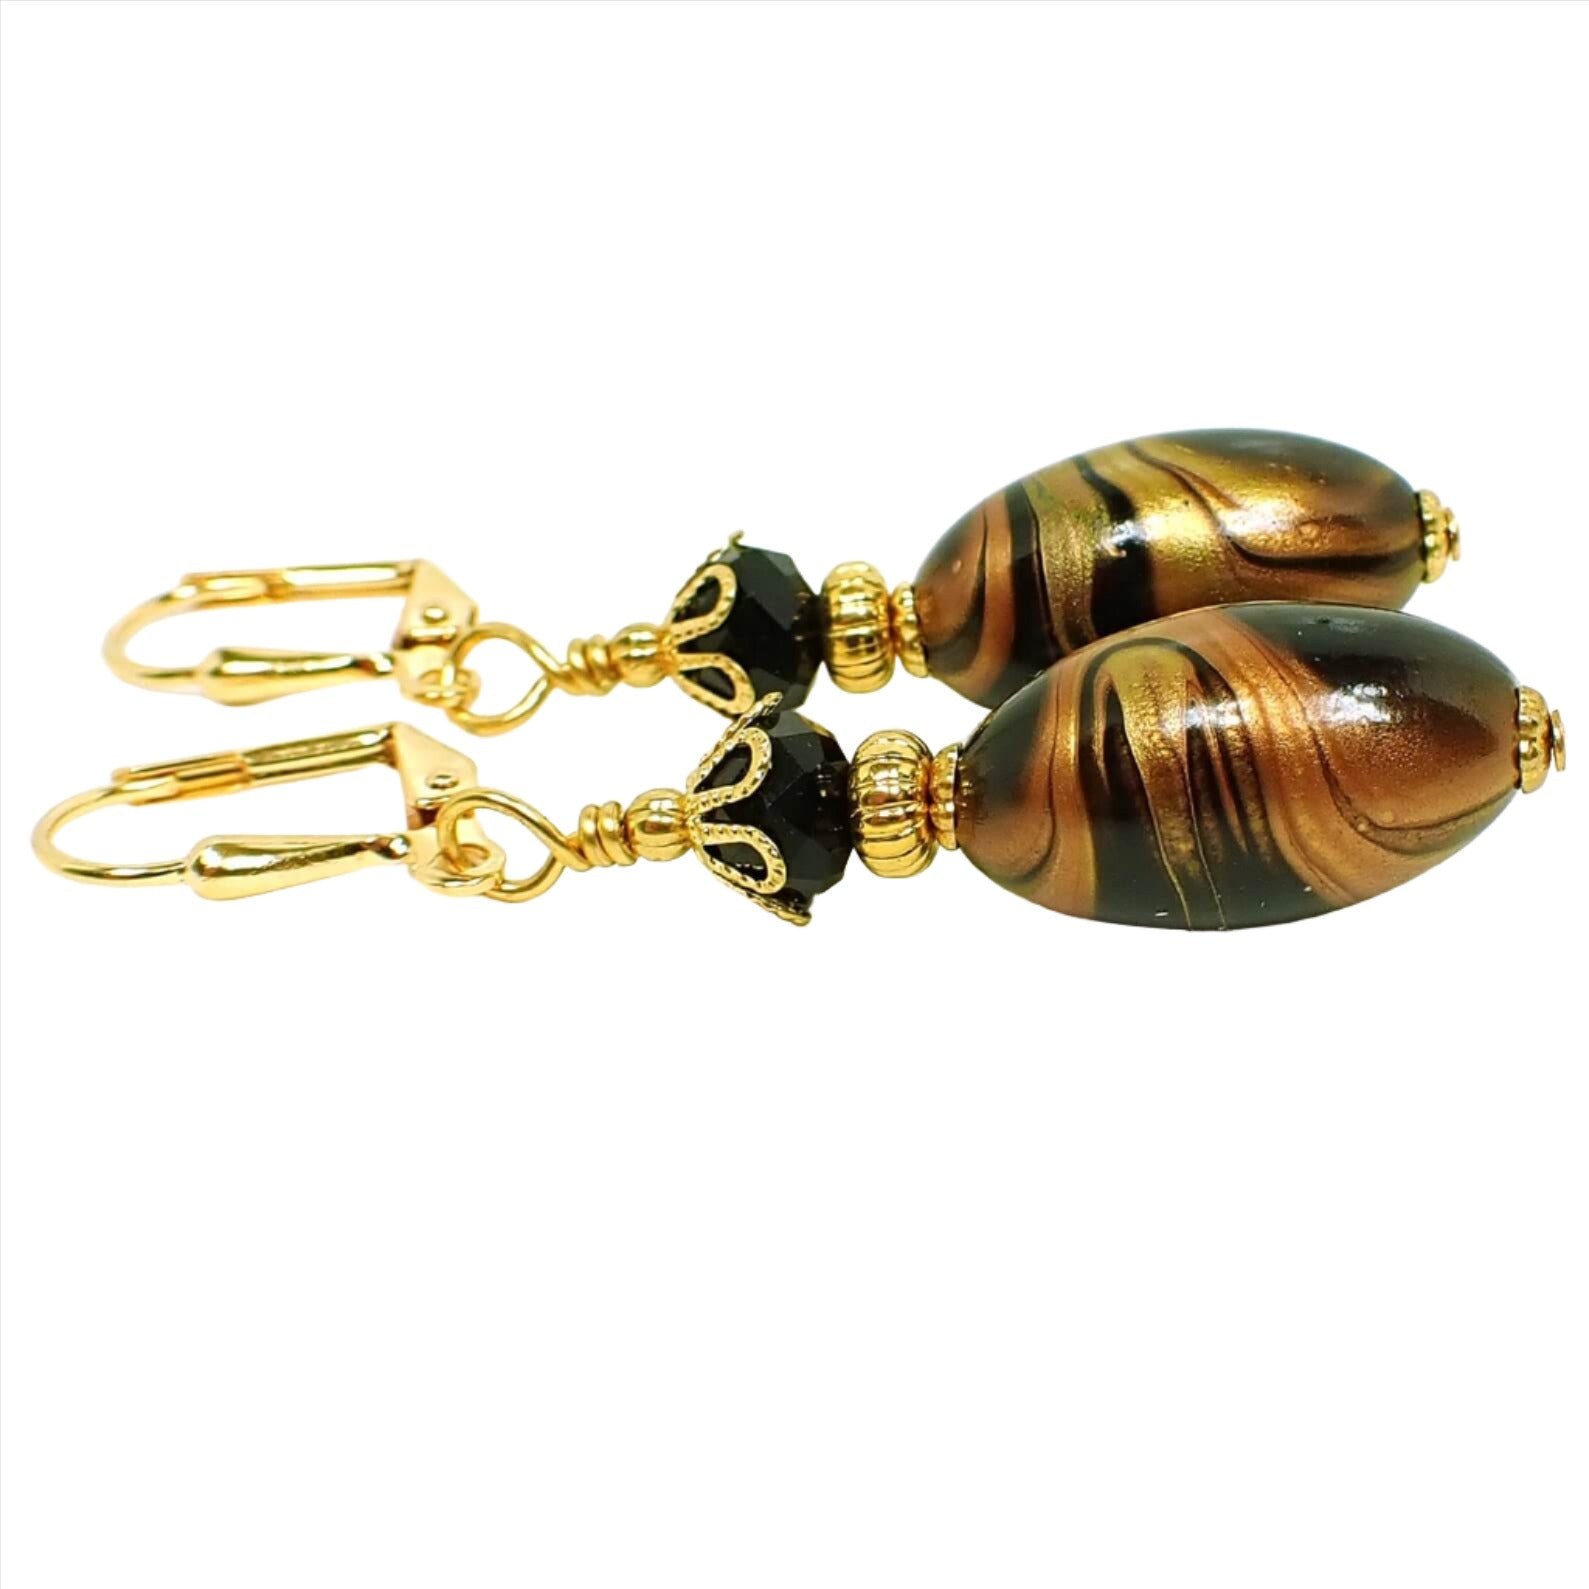 Side view of the handmade lucite earrings. The metal is gold plated in color. There are faceted black glass crystal beads at the top. The bottom lucite beads are black and oval in shape with marbled swirls of metallic gold and copper color. 